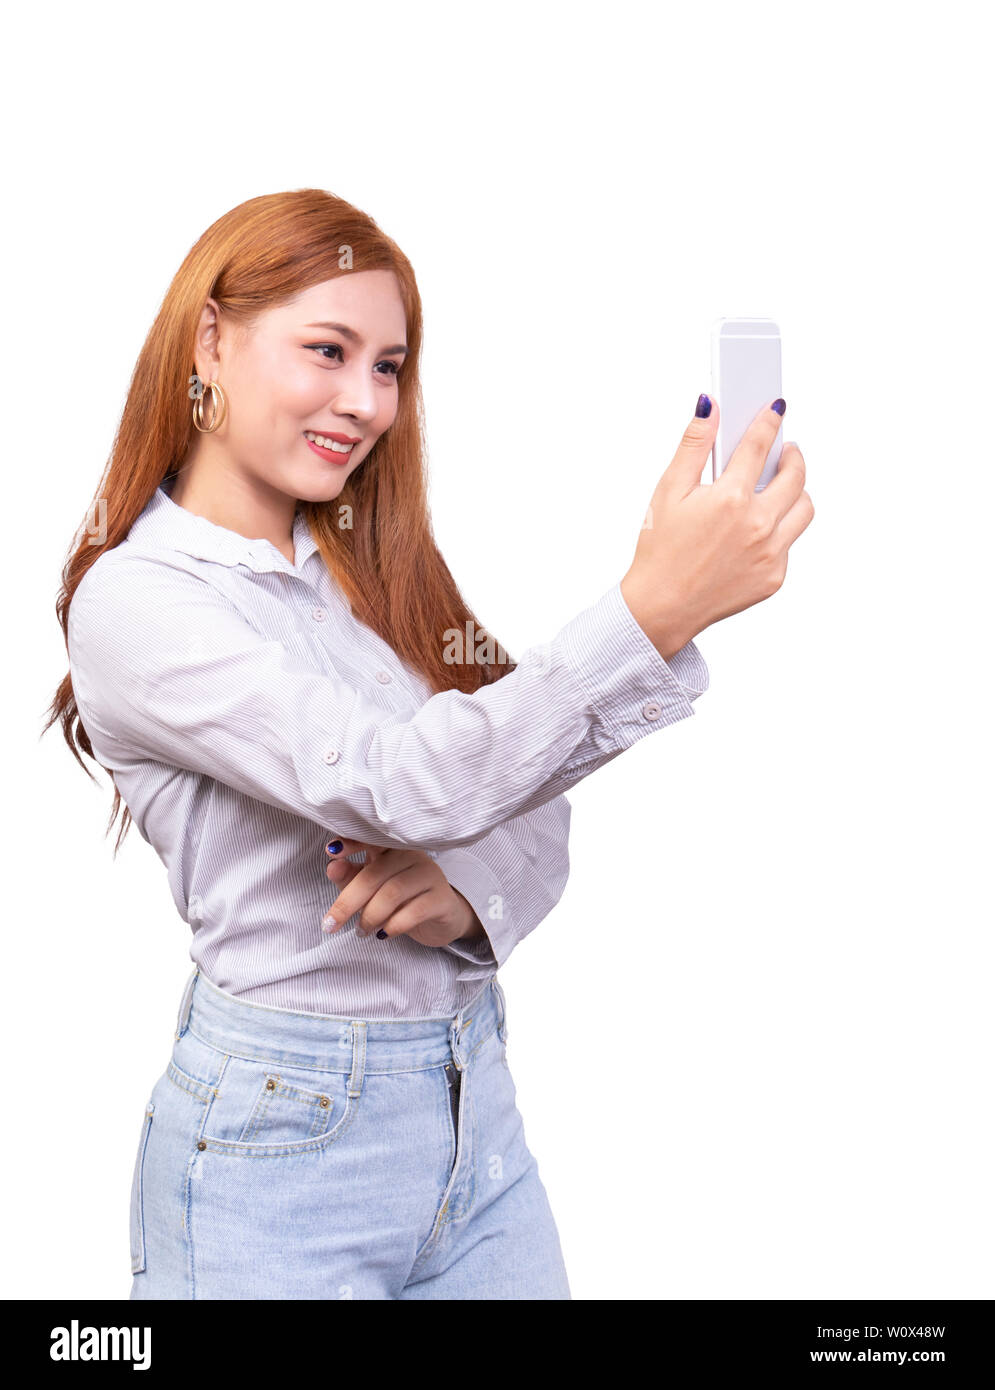 Asian woman using mobile smartphone for selfie ,video chat , face time or video call with smiling face. studio shot isolated on white background with Stock Photo